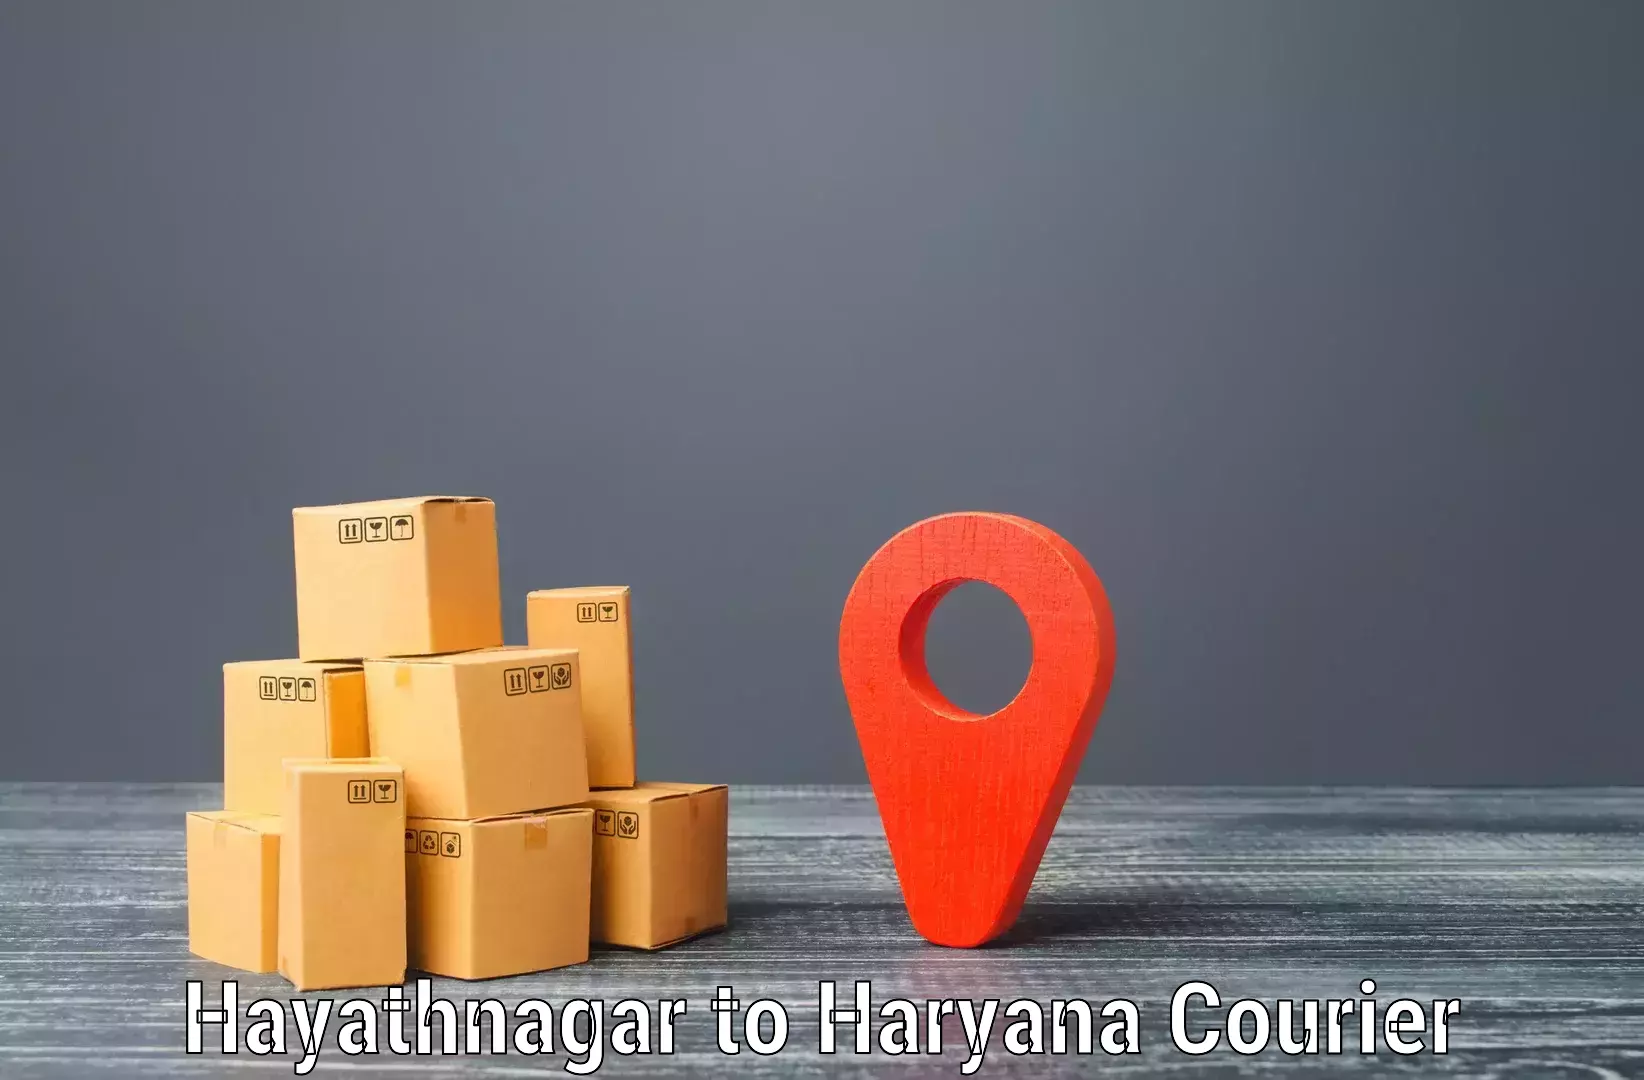 Reliable delivery network in Hayathnagar to Gurgaon